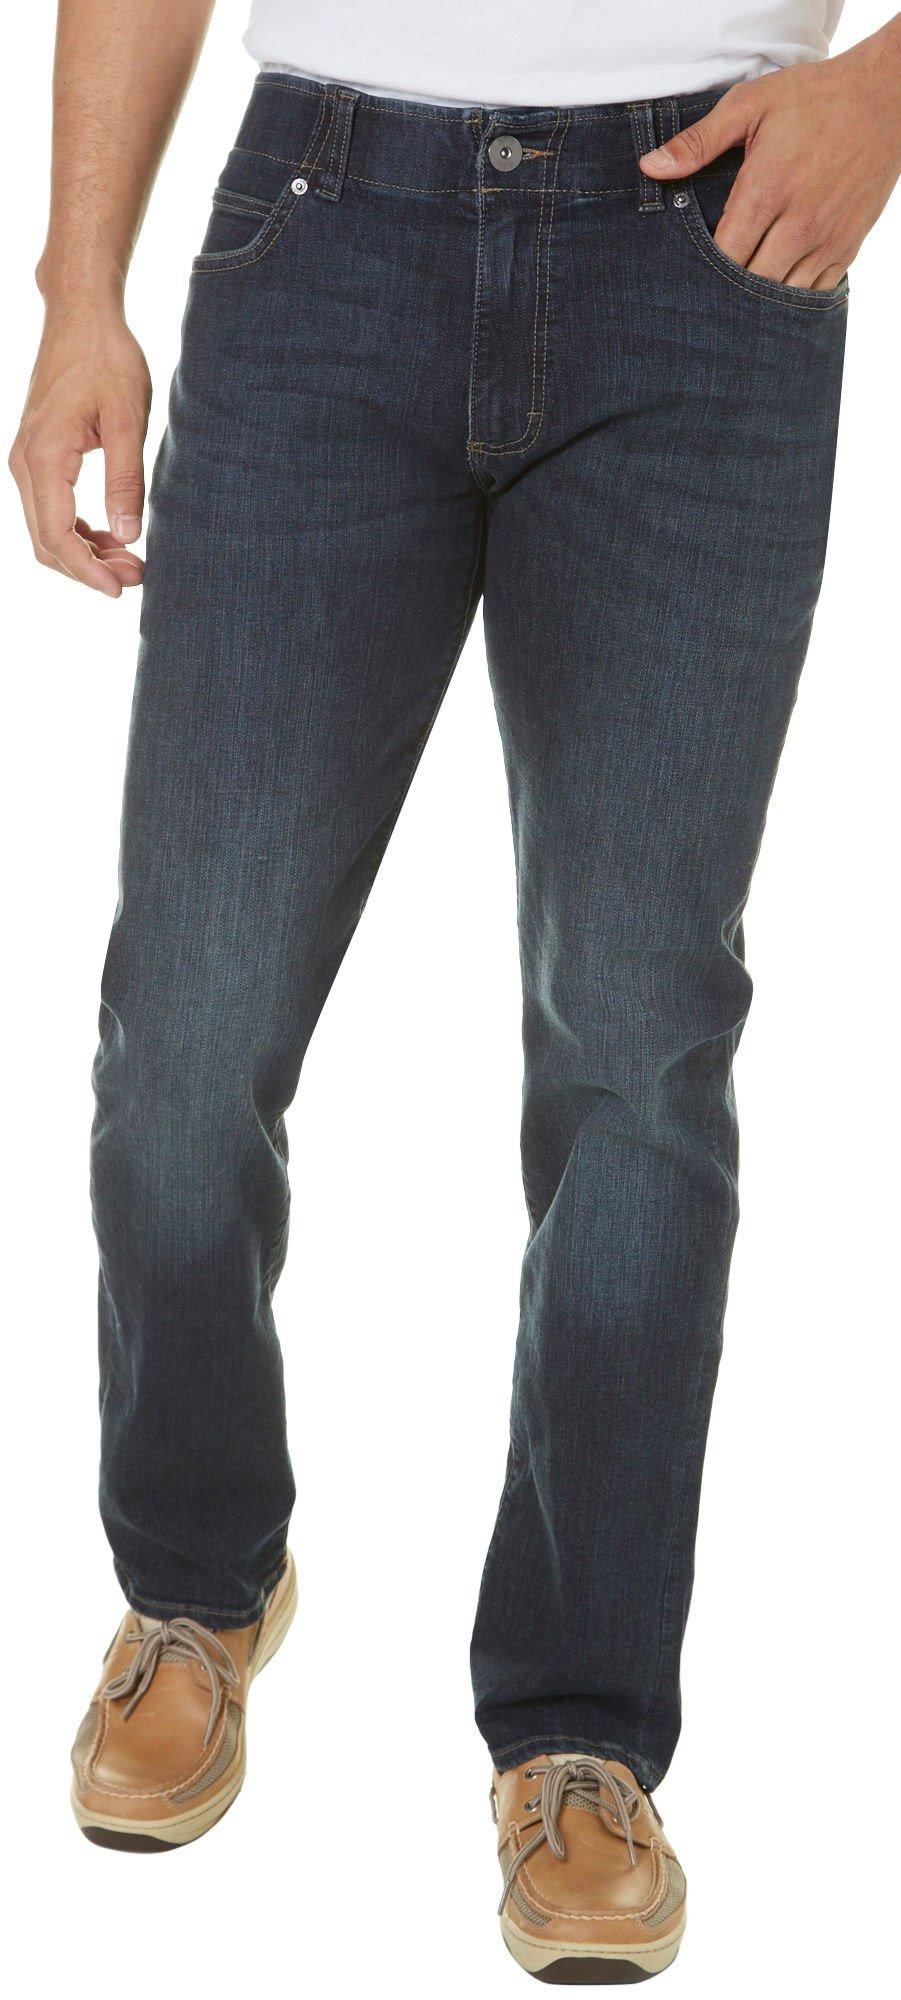 Lee Mens Extreme Motion Jeans